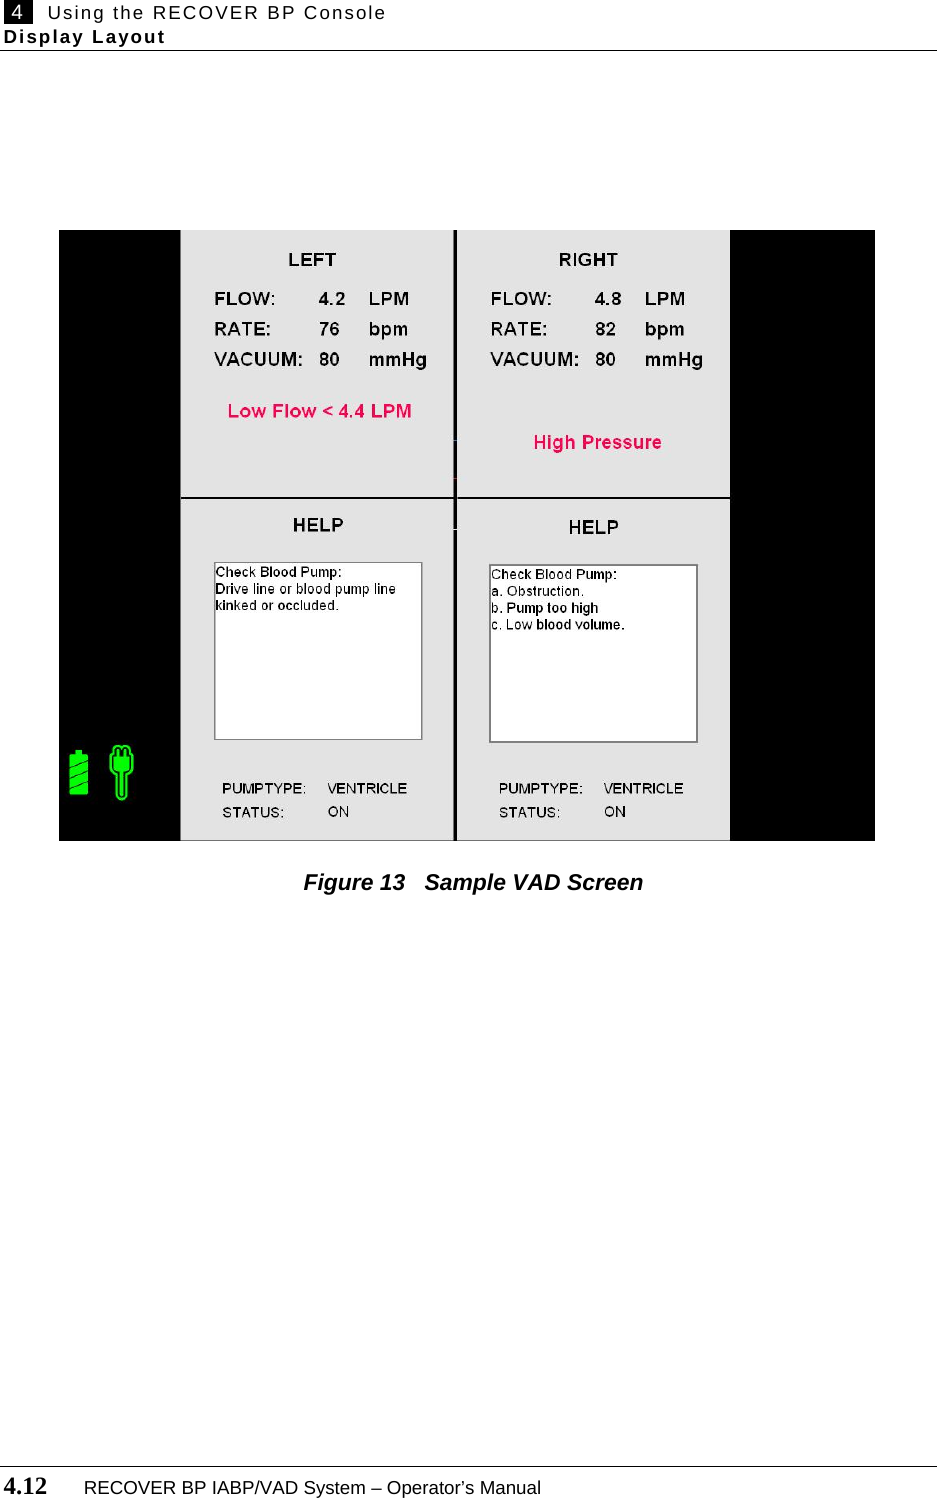  4   Using the RECOVER BP Console Display Layout  4.12       RECOVER BP IABP/VAD System – Operator’s Manual                Figure 13   Sample VAD Screen     